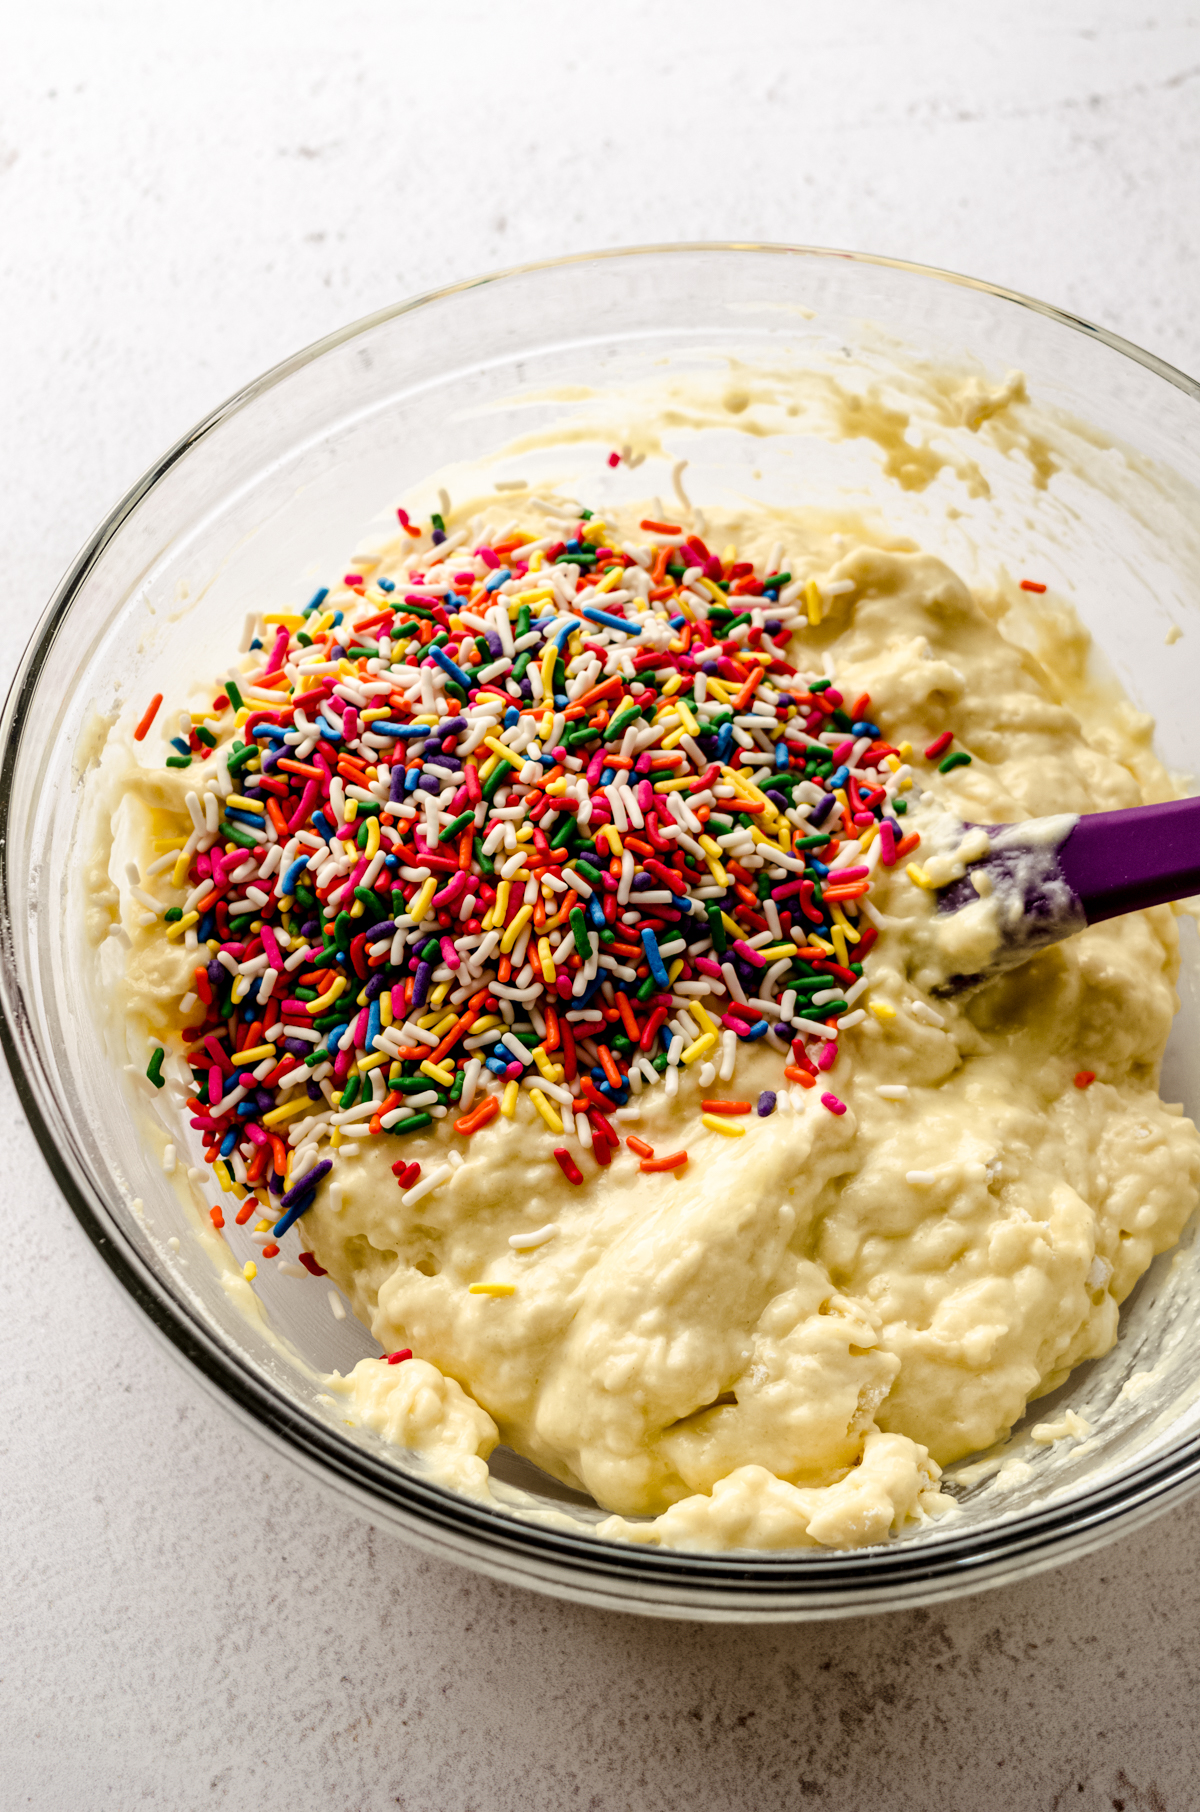 Batter for funfetti bread in a large glass bowl with a spatula.